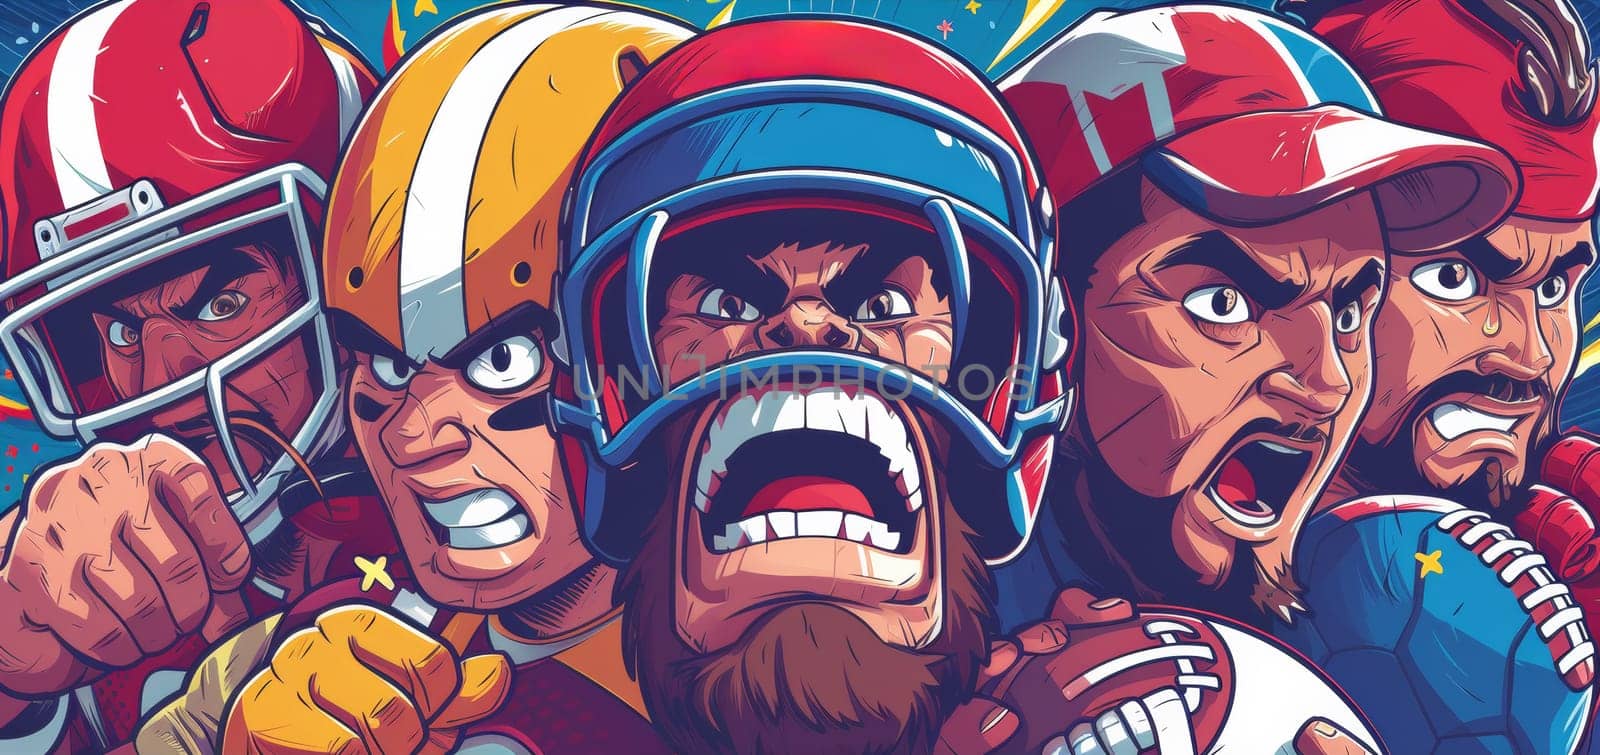 A cartoon illustration of a group of football players with helmets on